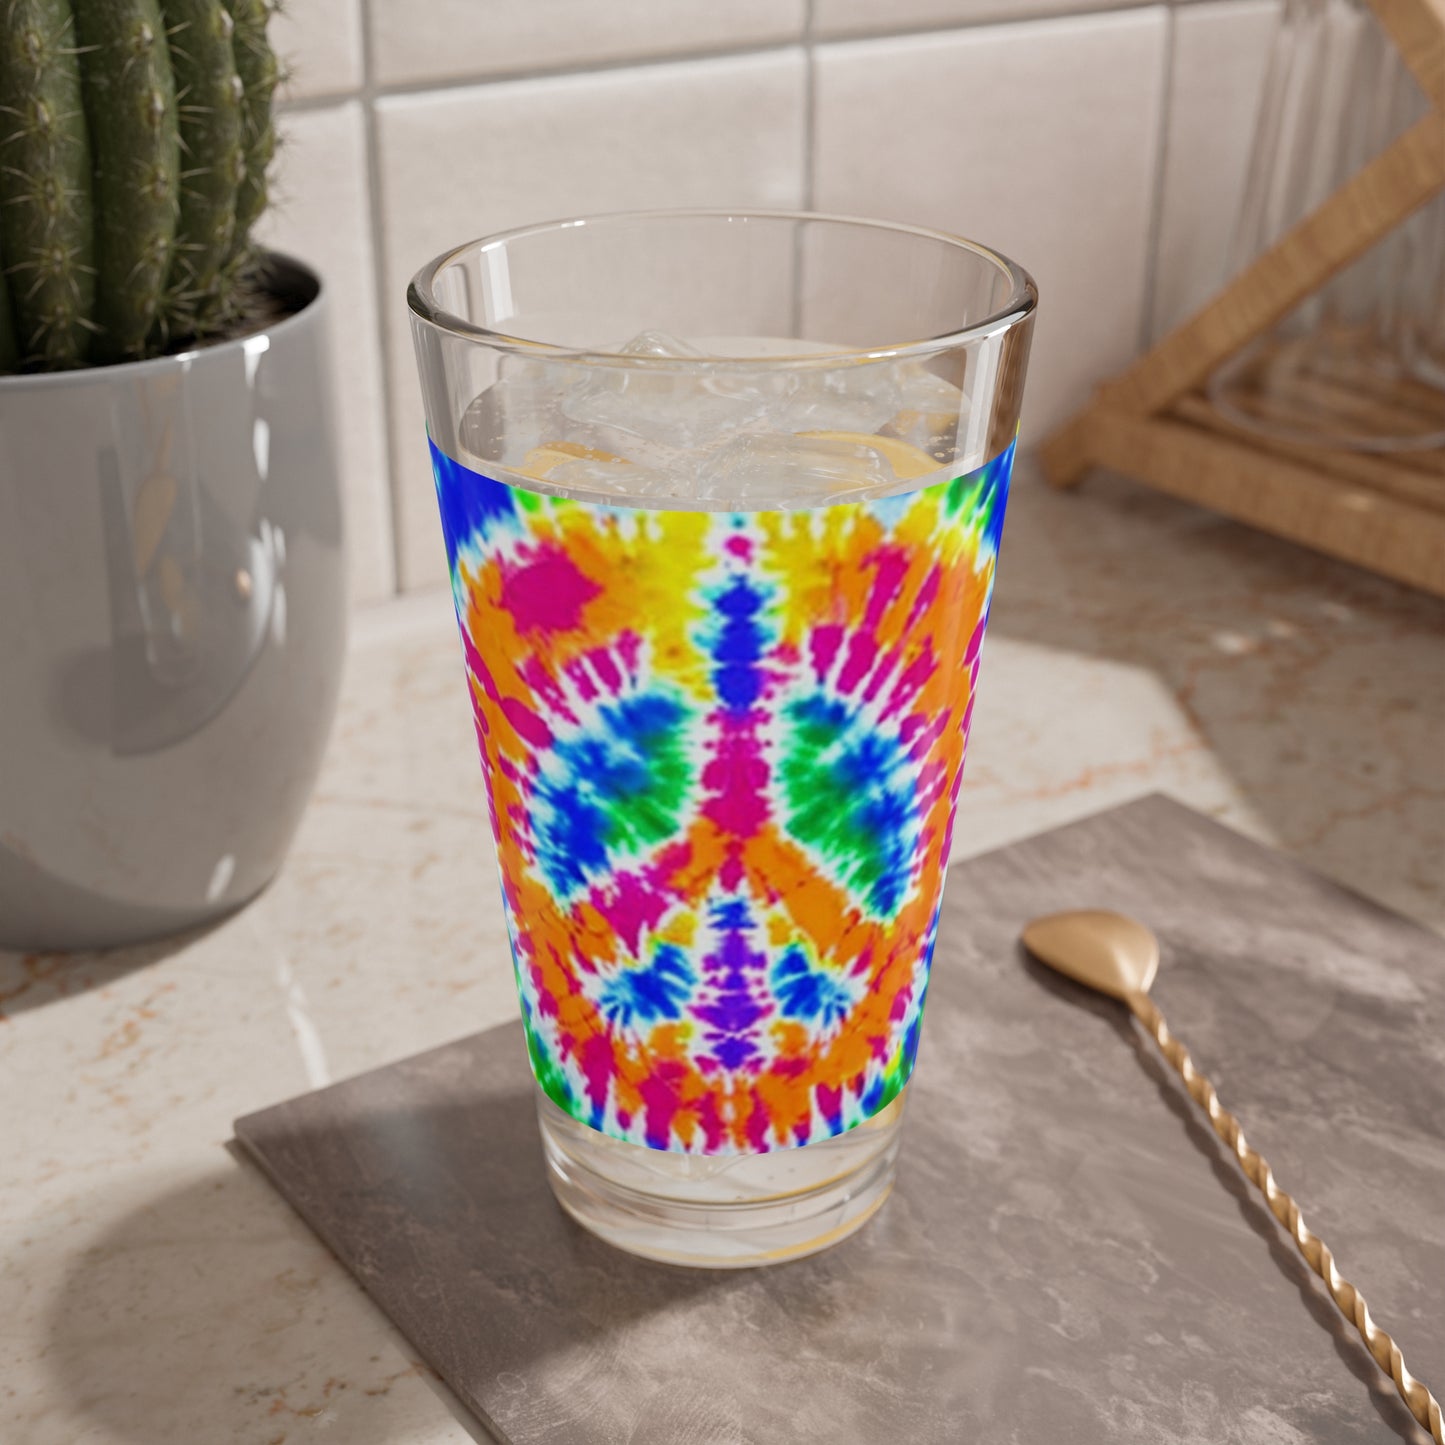 Tie Dye Peace Symbol Vintage 1960s Multi Colored New Hippie Style Cocktail Party Beverage Entertaining Mixing Glass, 16oz